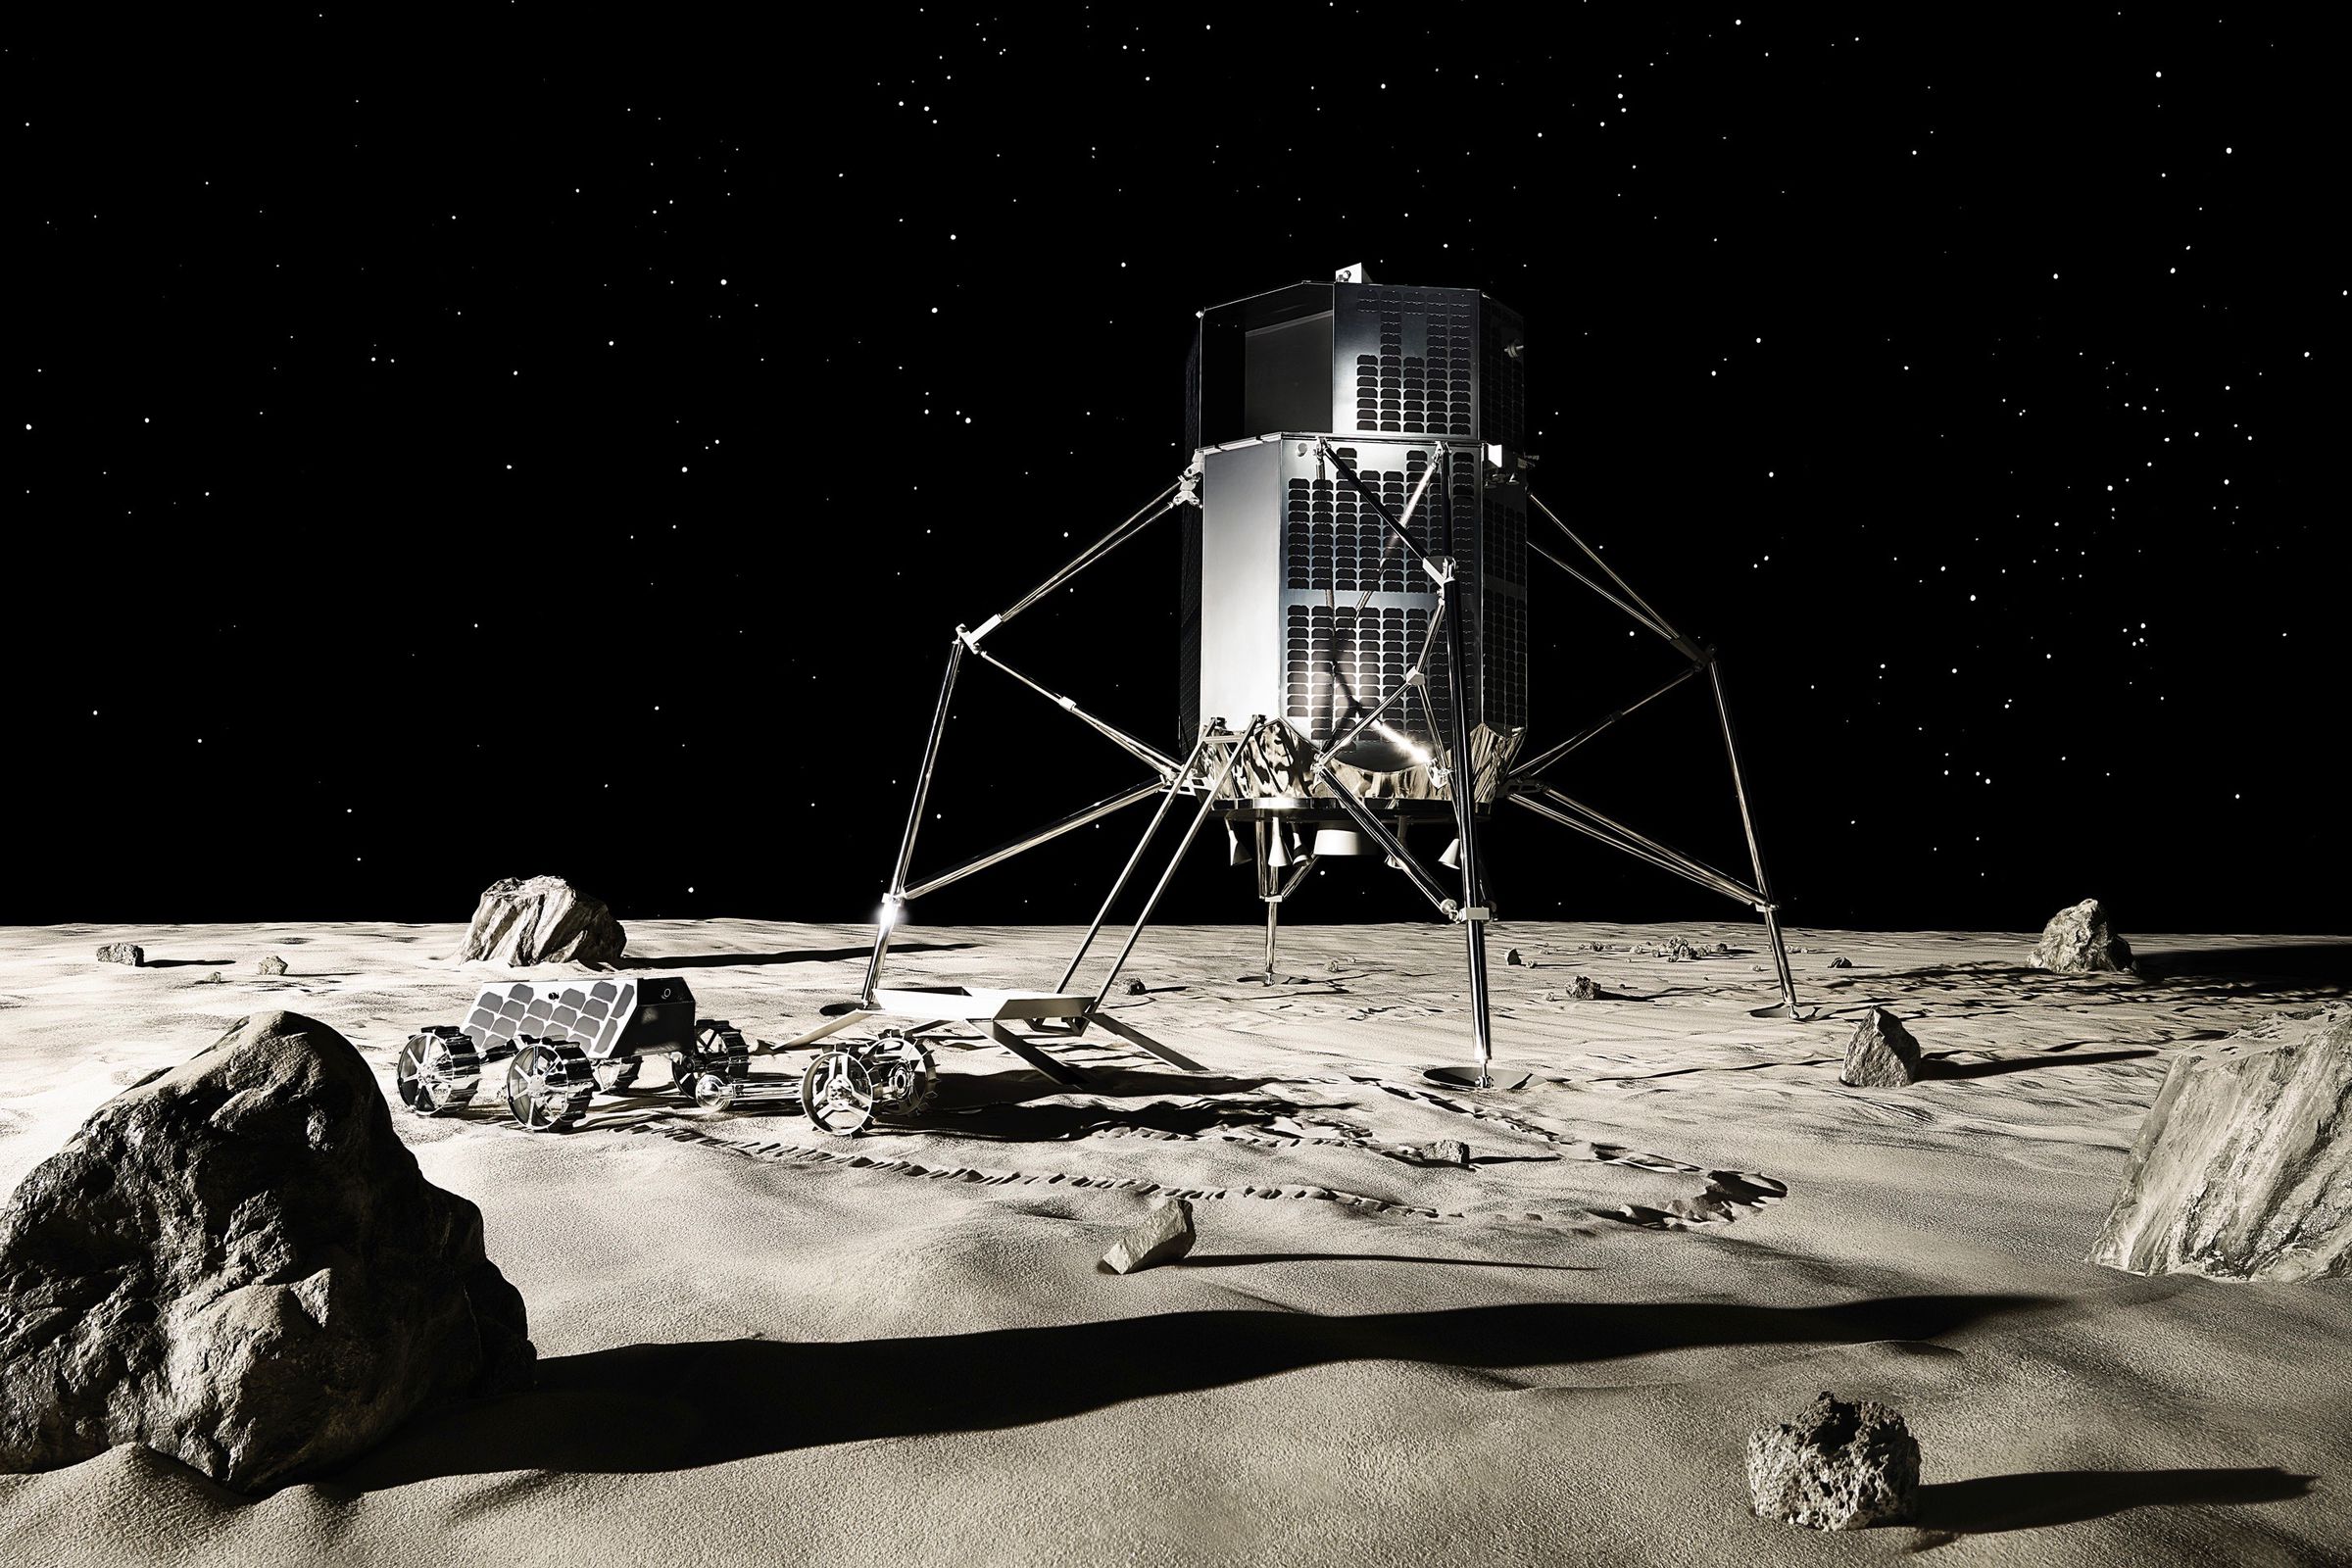 An artistic rendering of ispace’s lunar lander and rover designs.